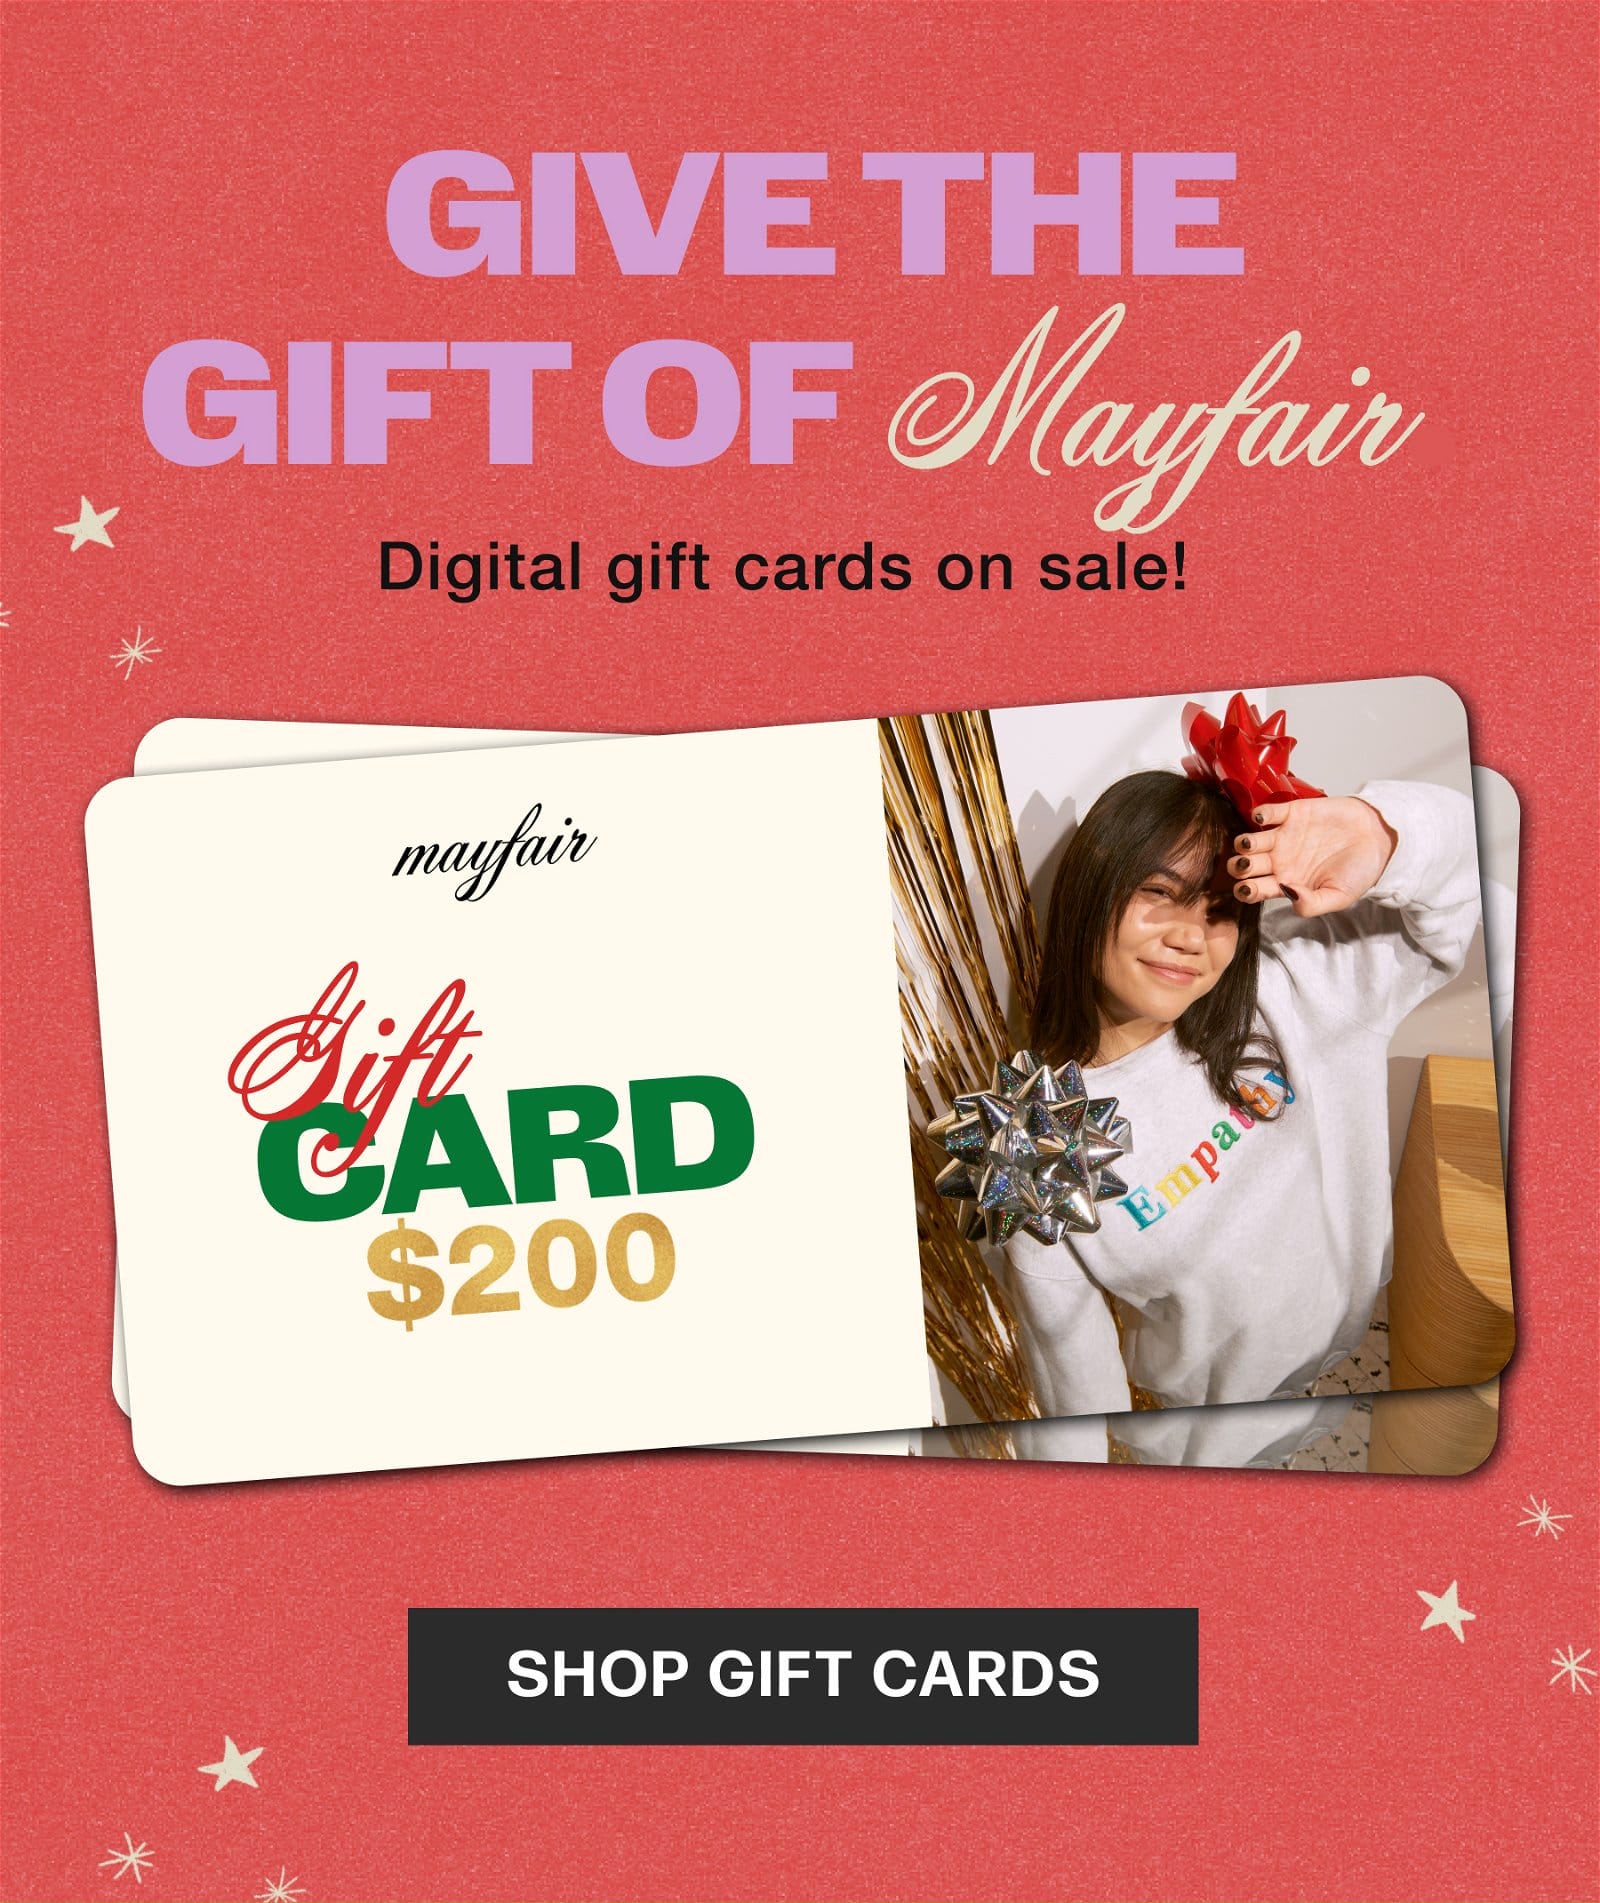 Give the Gift of Mayfair | Digital Cards On Sale!